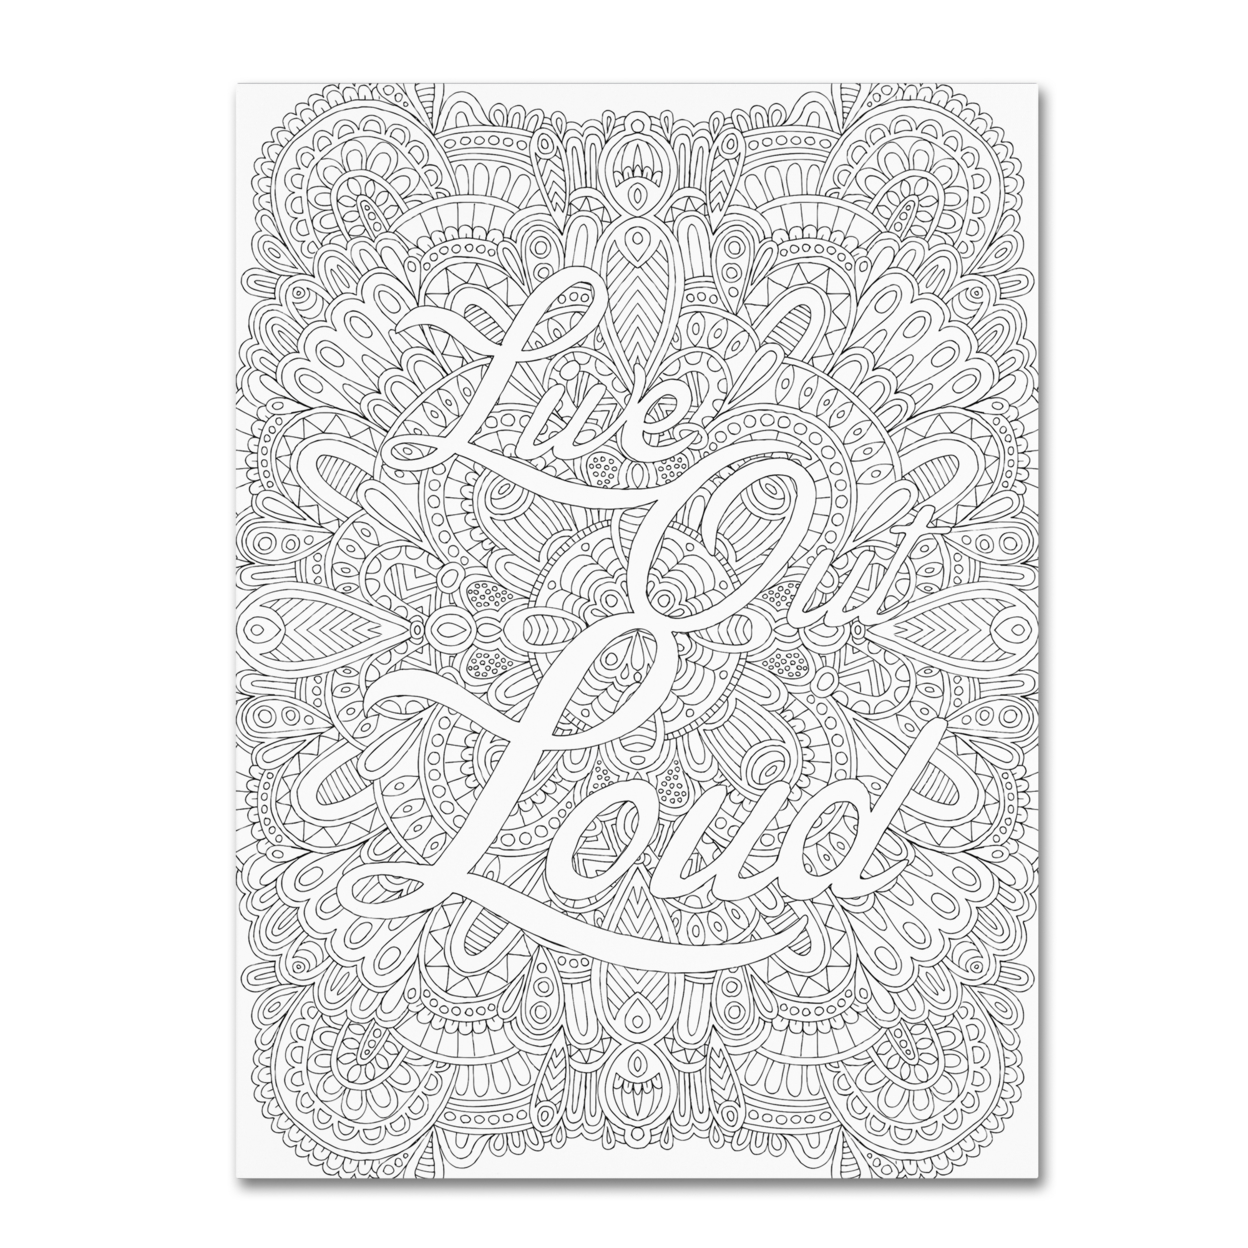 Hello Angel 'Inspirational Quotes 13' Canvas Art 18 X 24